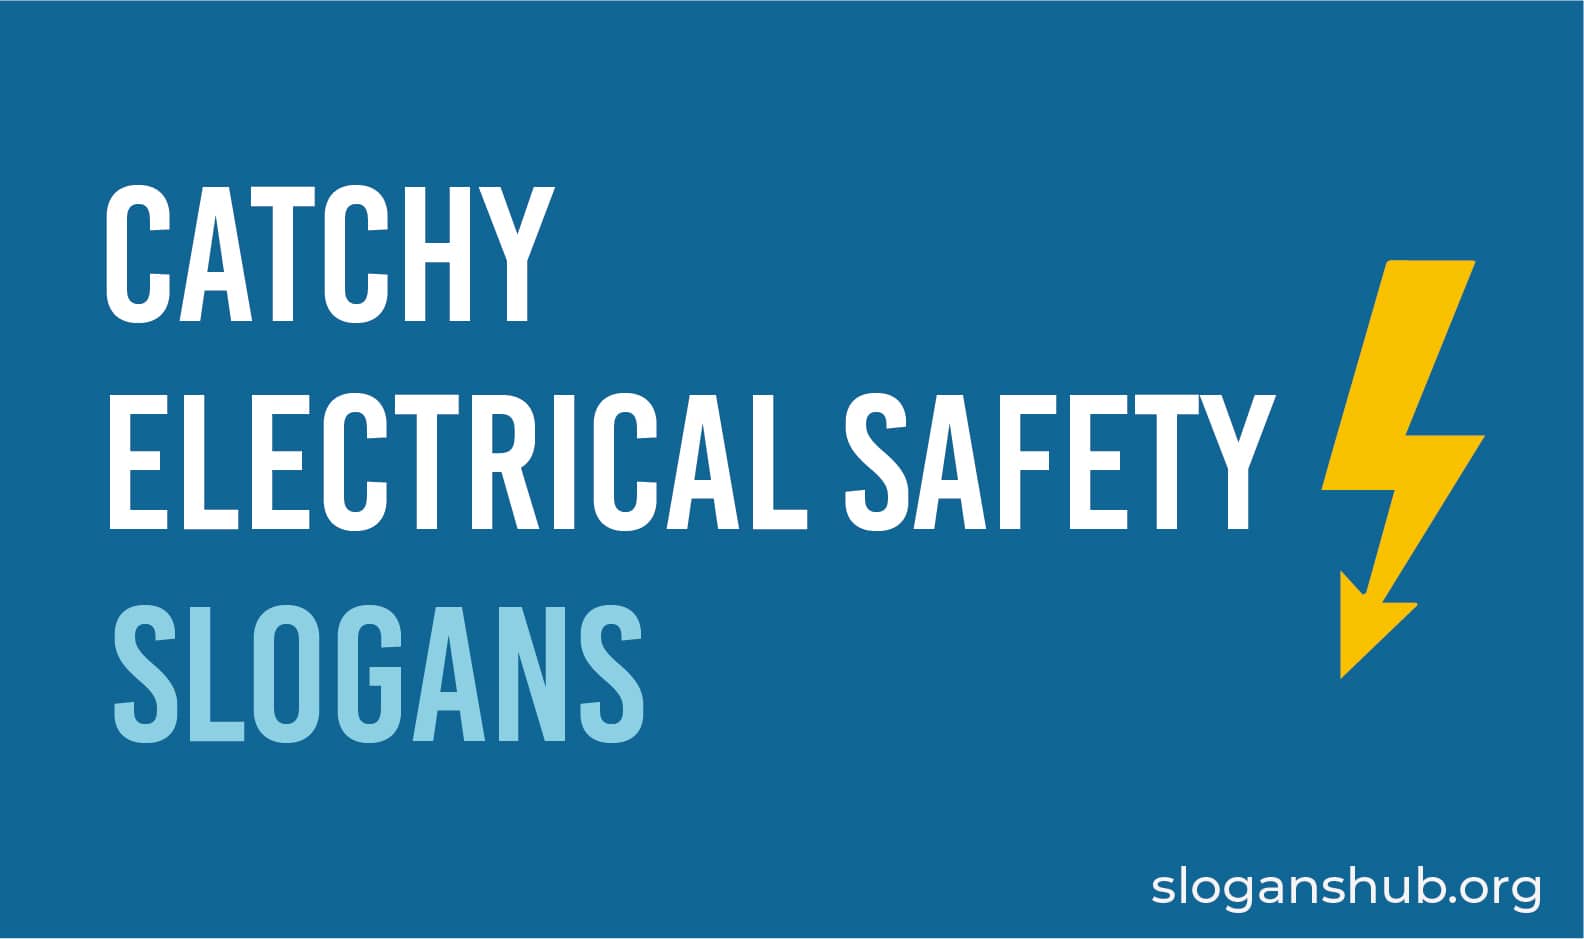 50 Catchy Electrical Safety Slogans